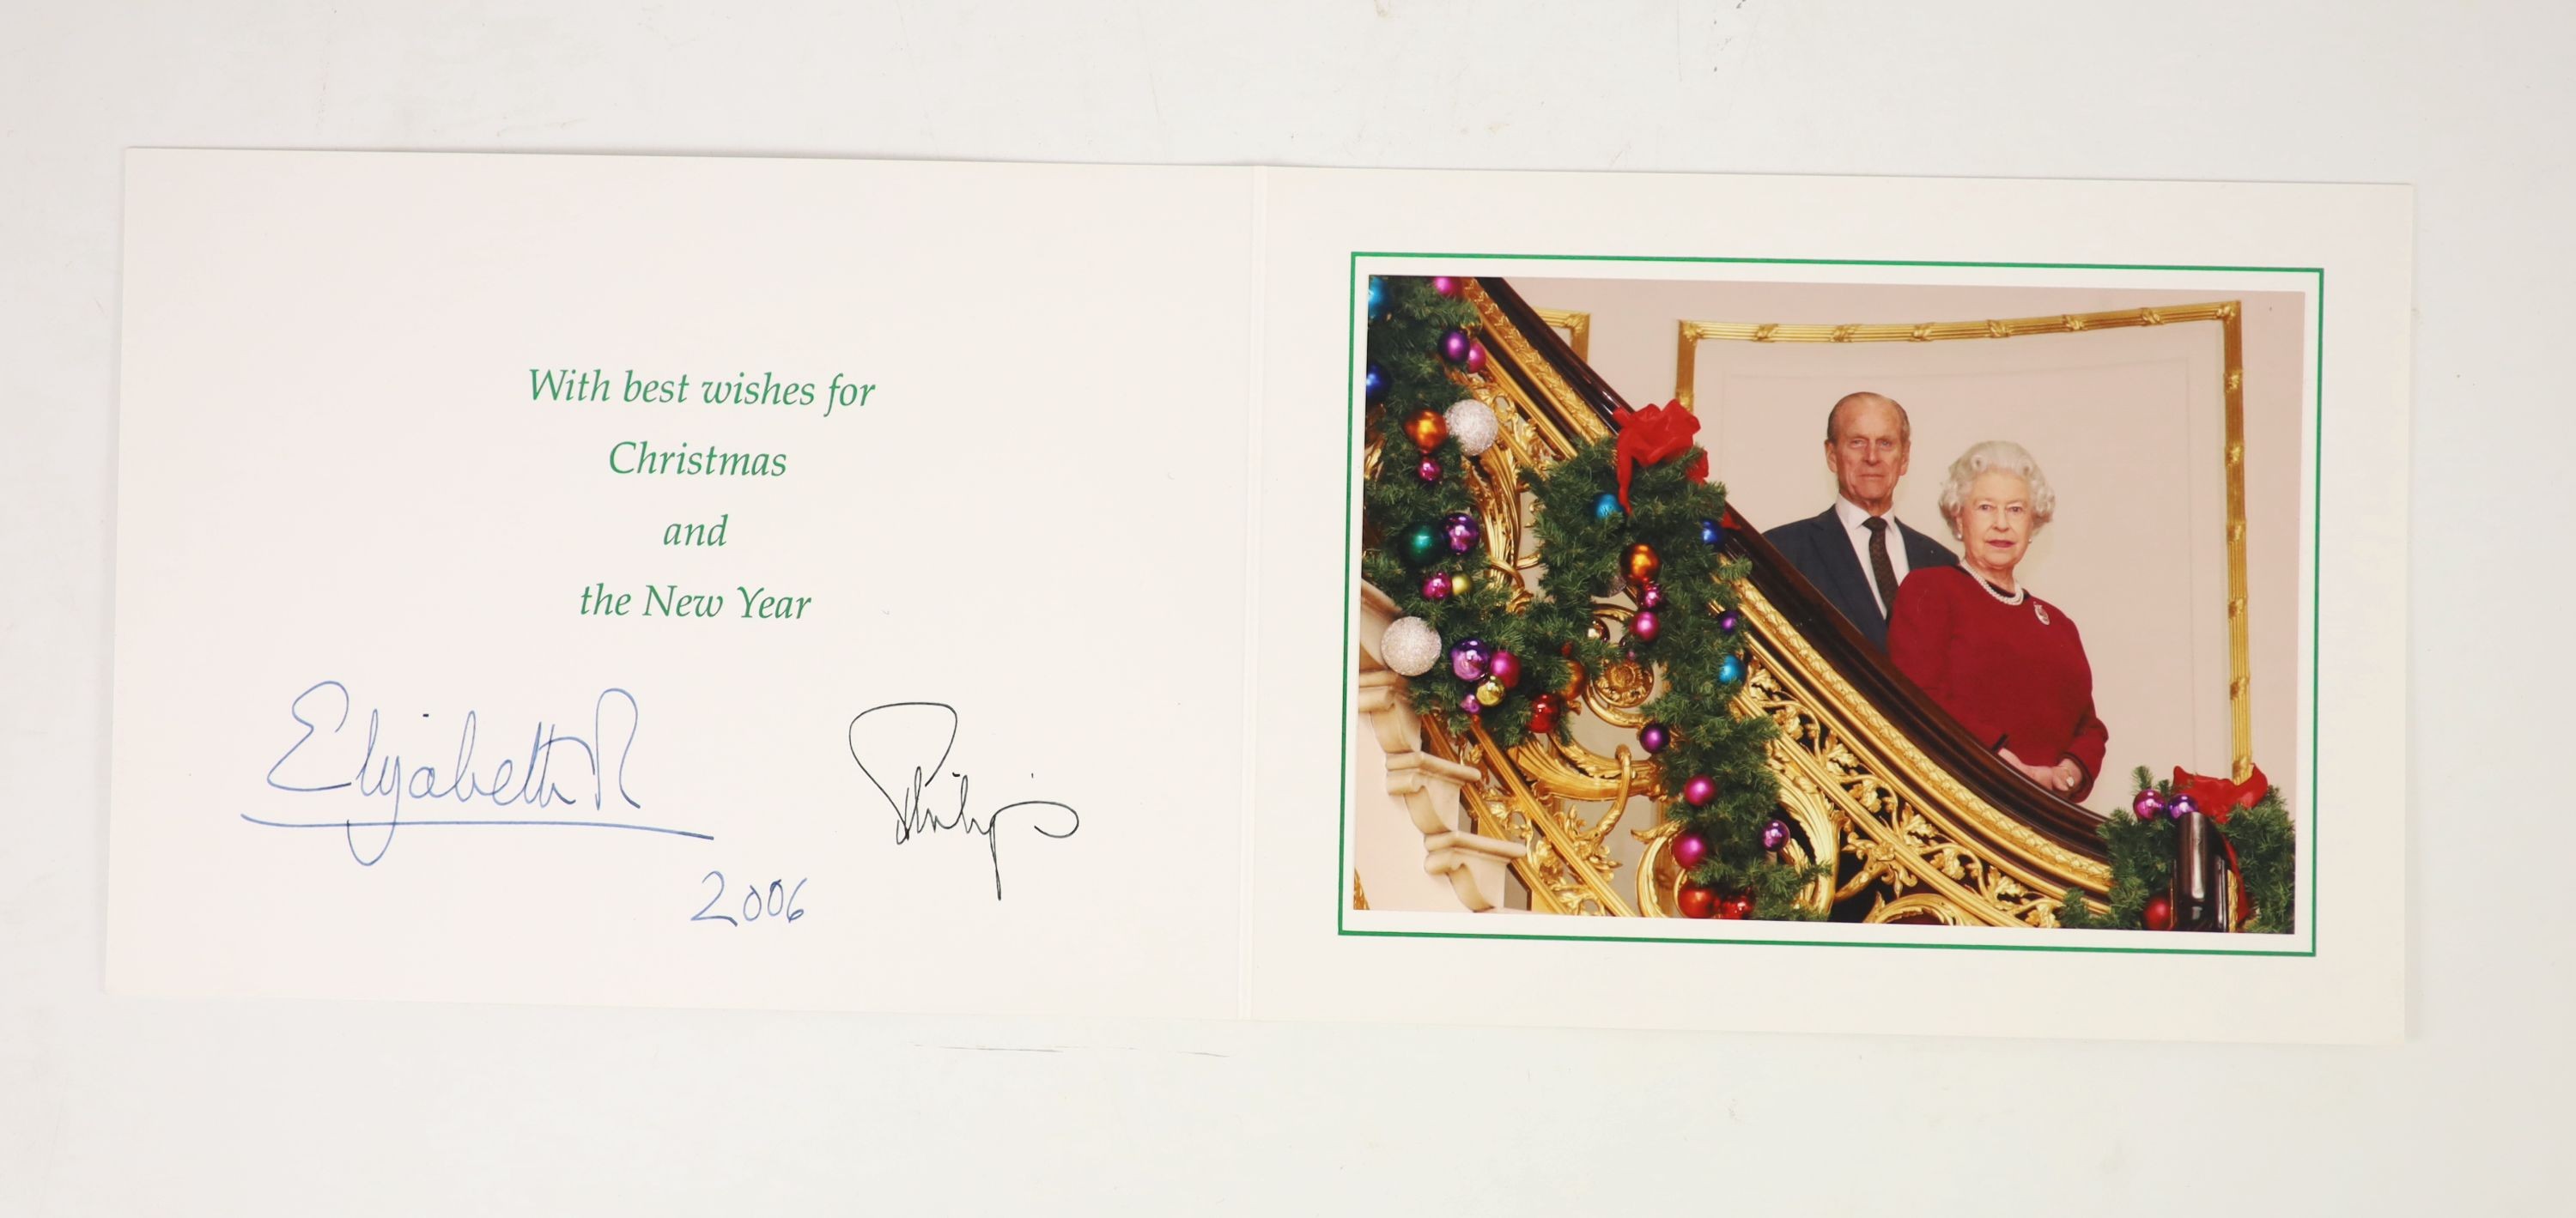 Elizabeth II, Queen of England, Philip, Prince, Duke of Edinburgh - a collection of 9 colour photographs, sent as Christmas cards, for the years 2003, 2005-06, 2008 and 2014, portraying and signed by the Queen and the Du